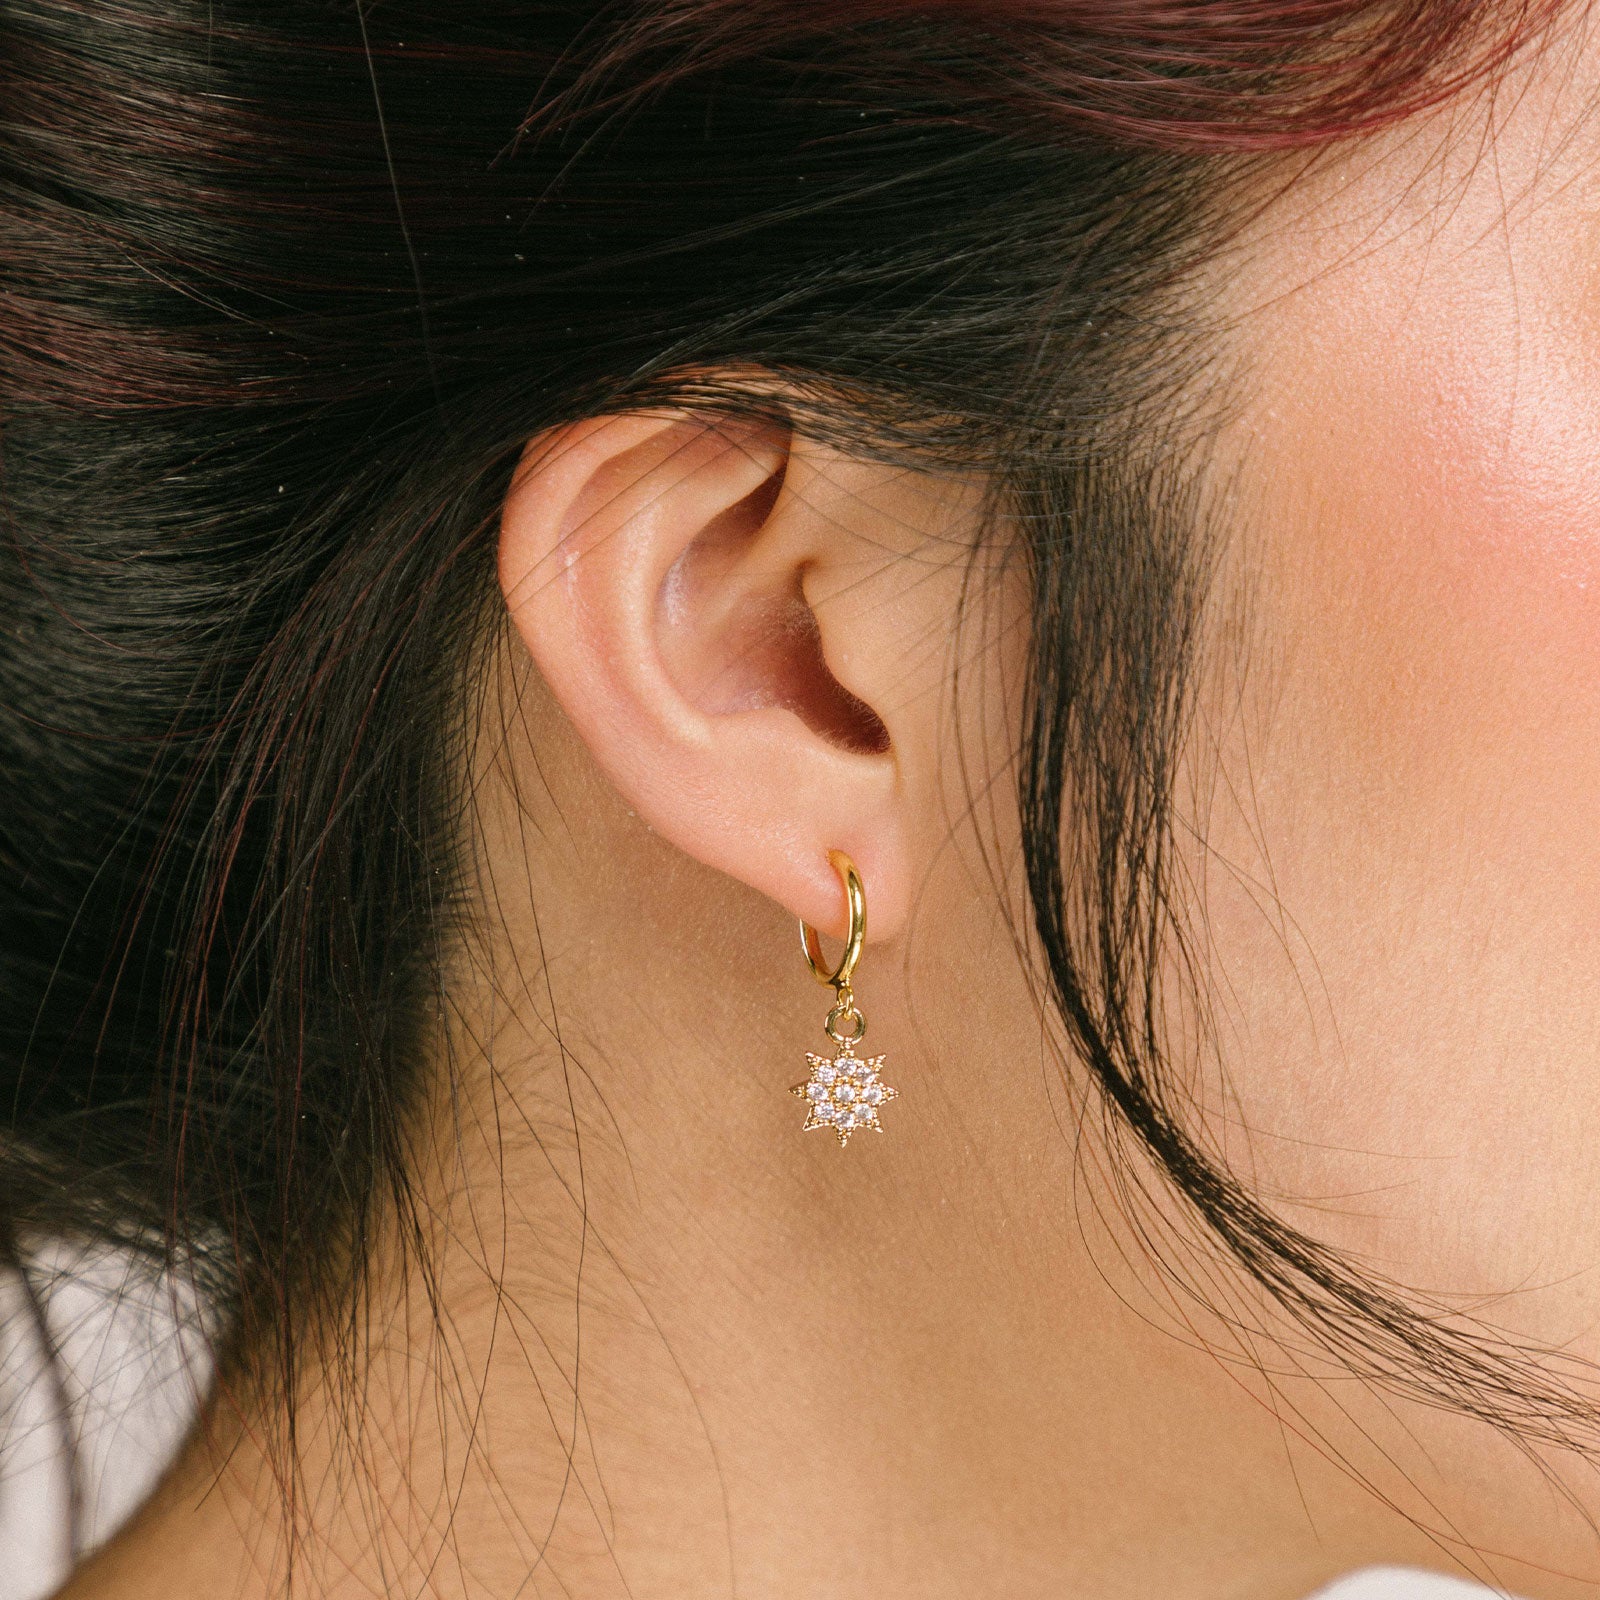 A model wearing the Star Charm Clip On Earring is designed with a sliding spring mechanism, ideal for those with smaller or thinner ear lobes. You can rely on a secure hold that can adjust to your ear thickness. Wear these earrings comfortably for 2 - 4 hours. Crafted from brass and cubic zirconia, this earring is sold as a single pair.